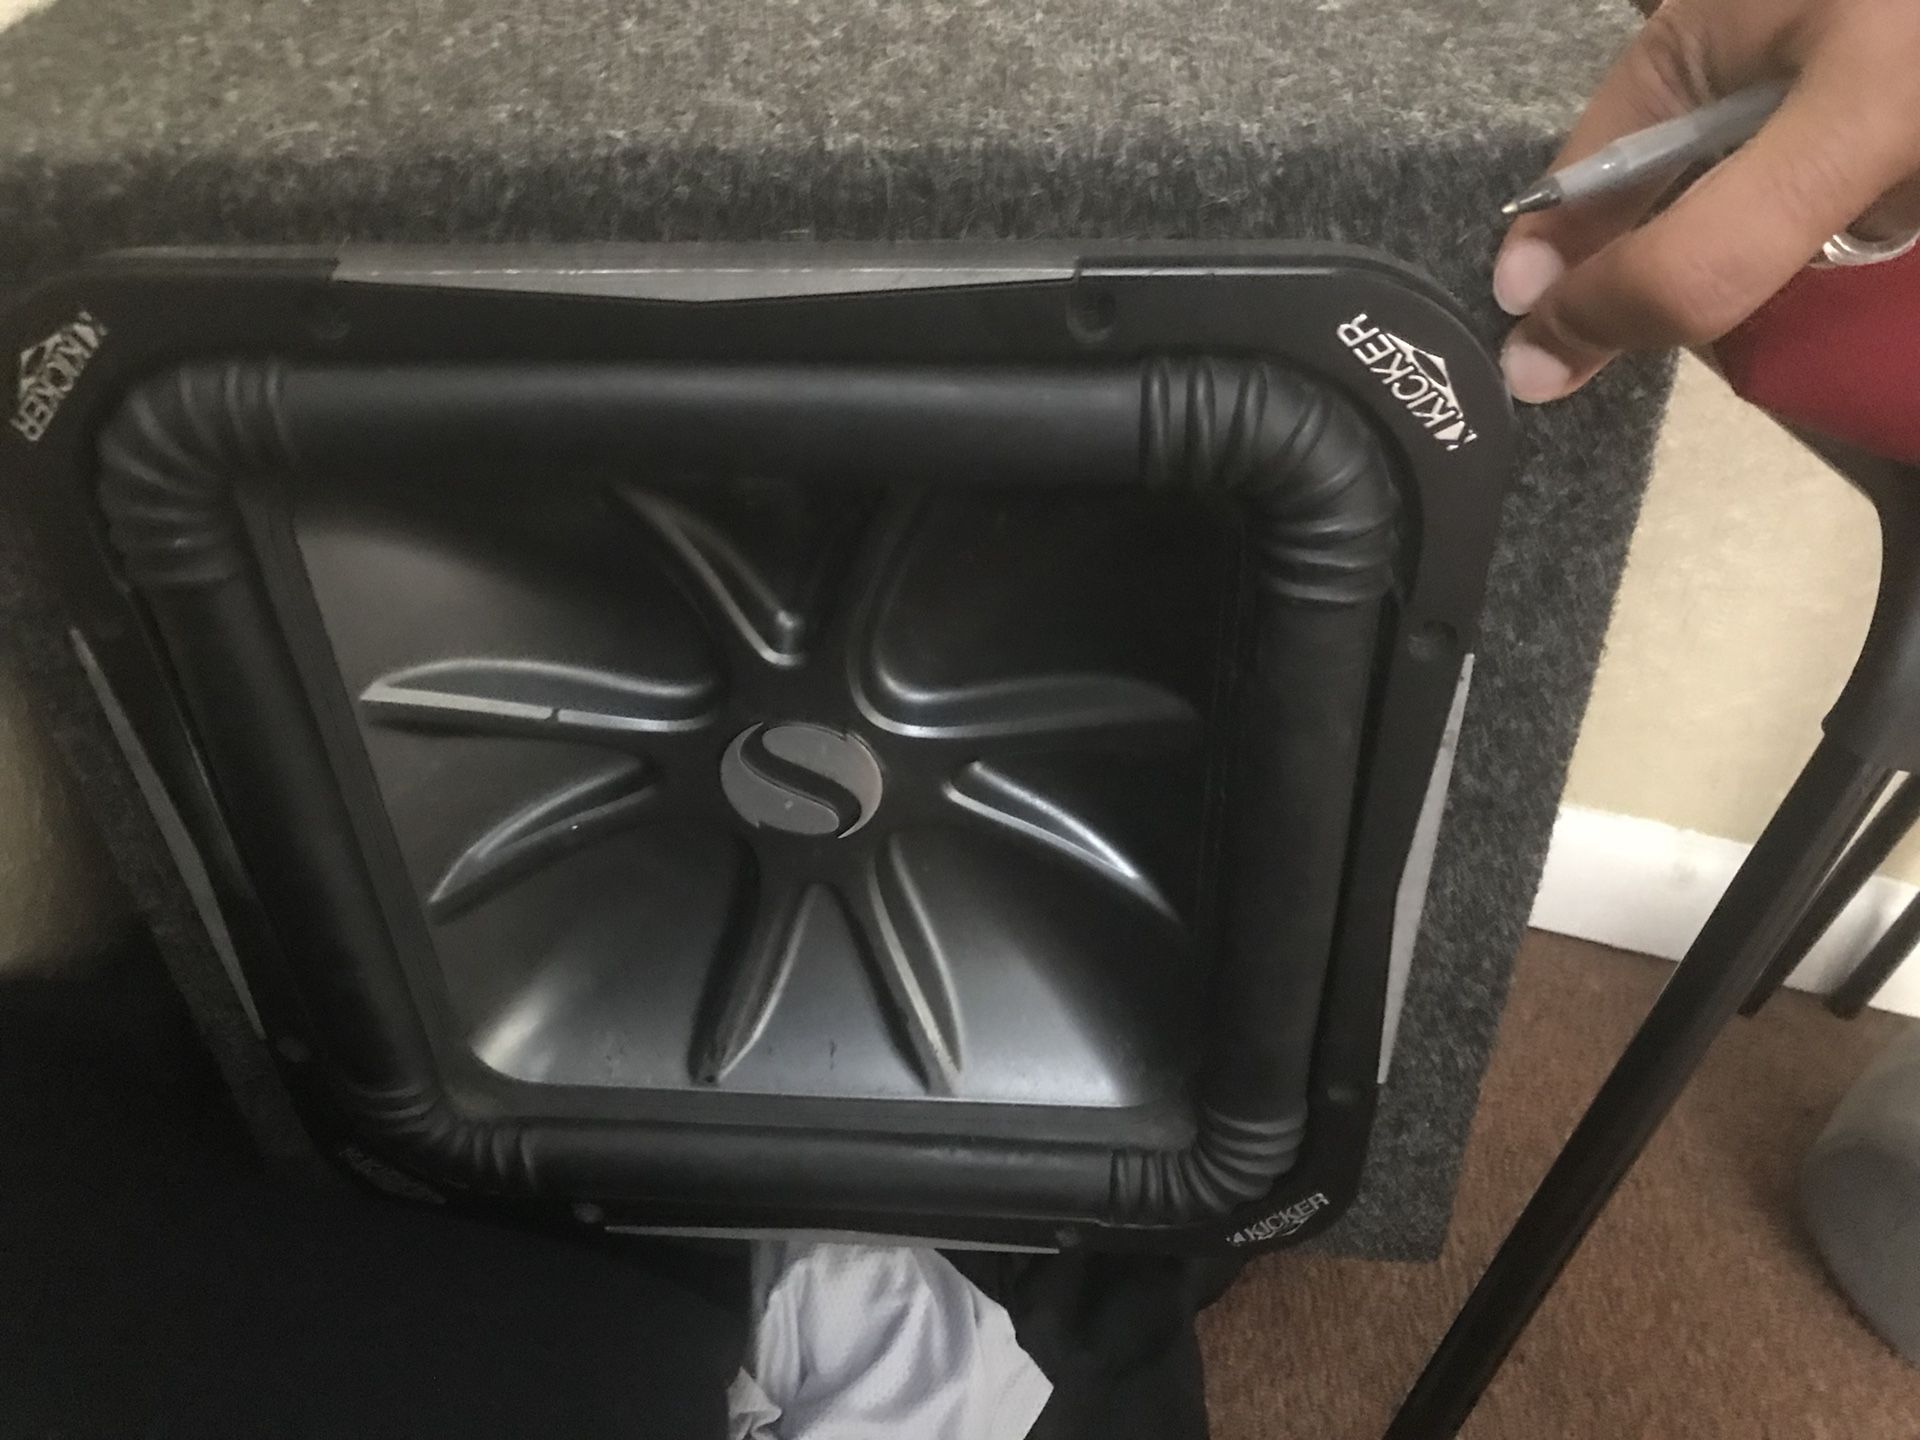 Kicker subwoofer and Rockford amp